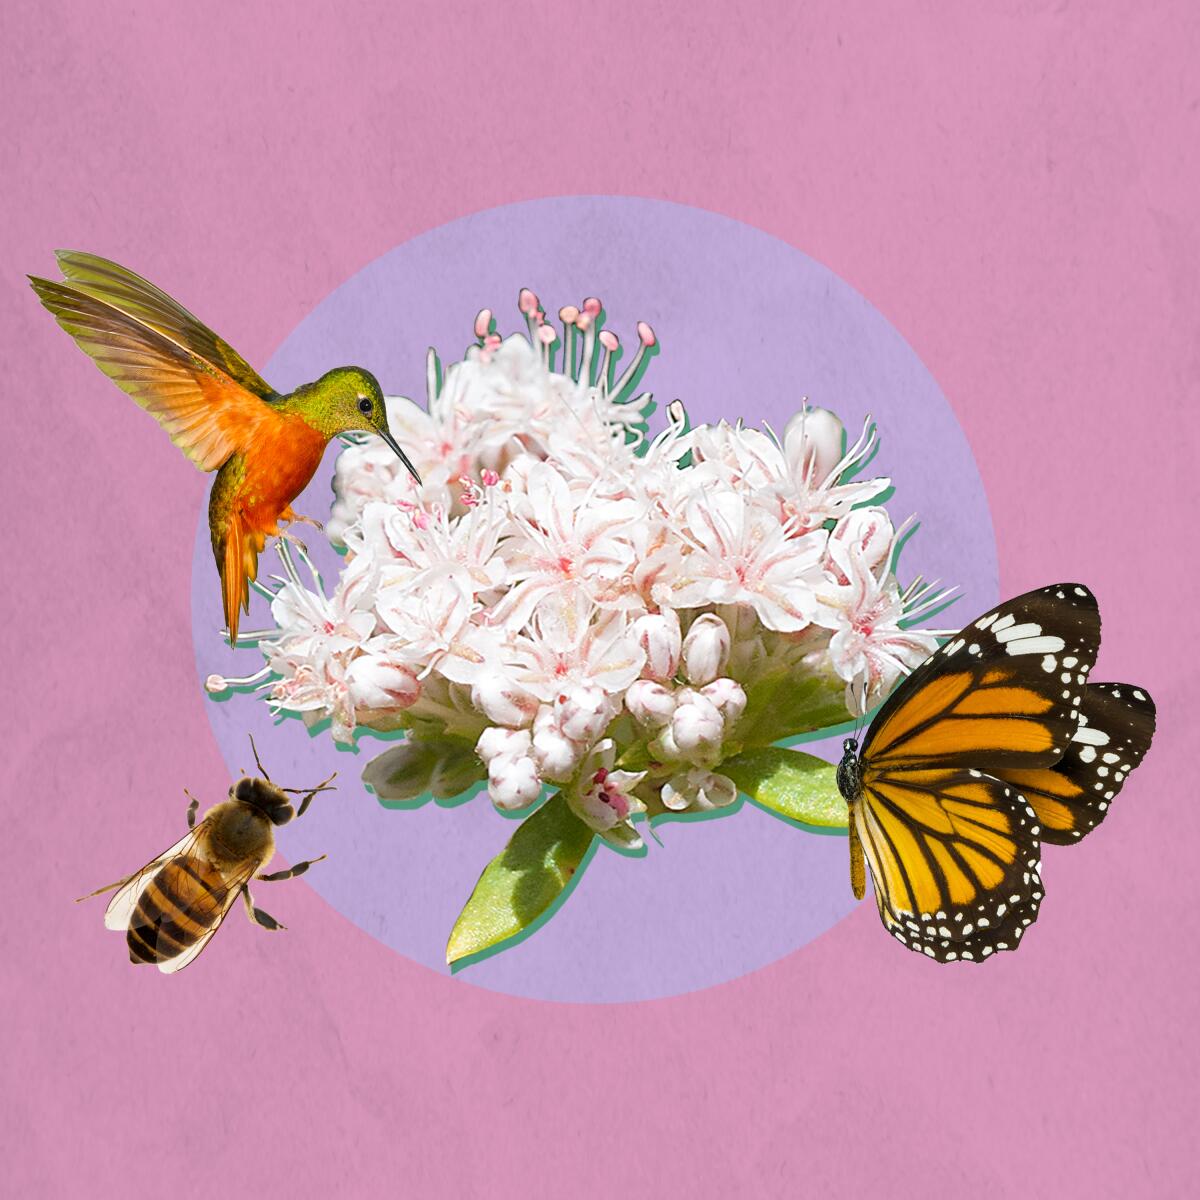 Illustration of wildflowers with hummingbird and butterfly